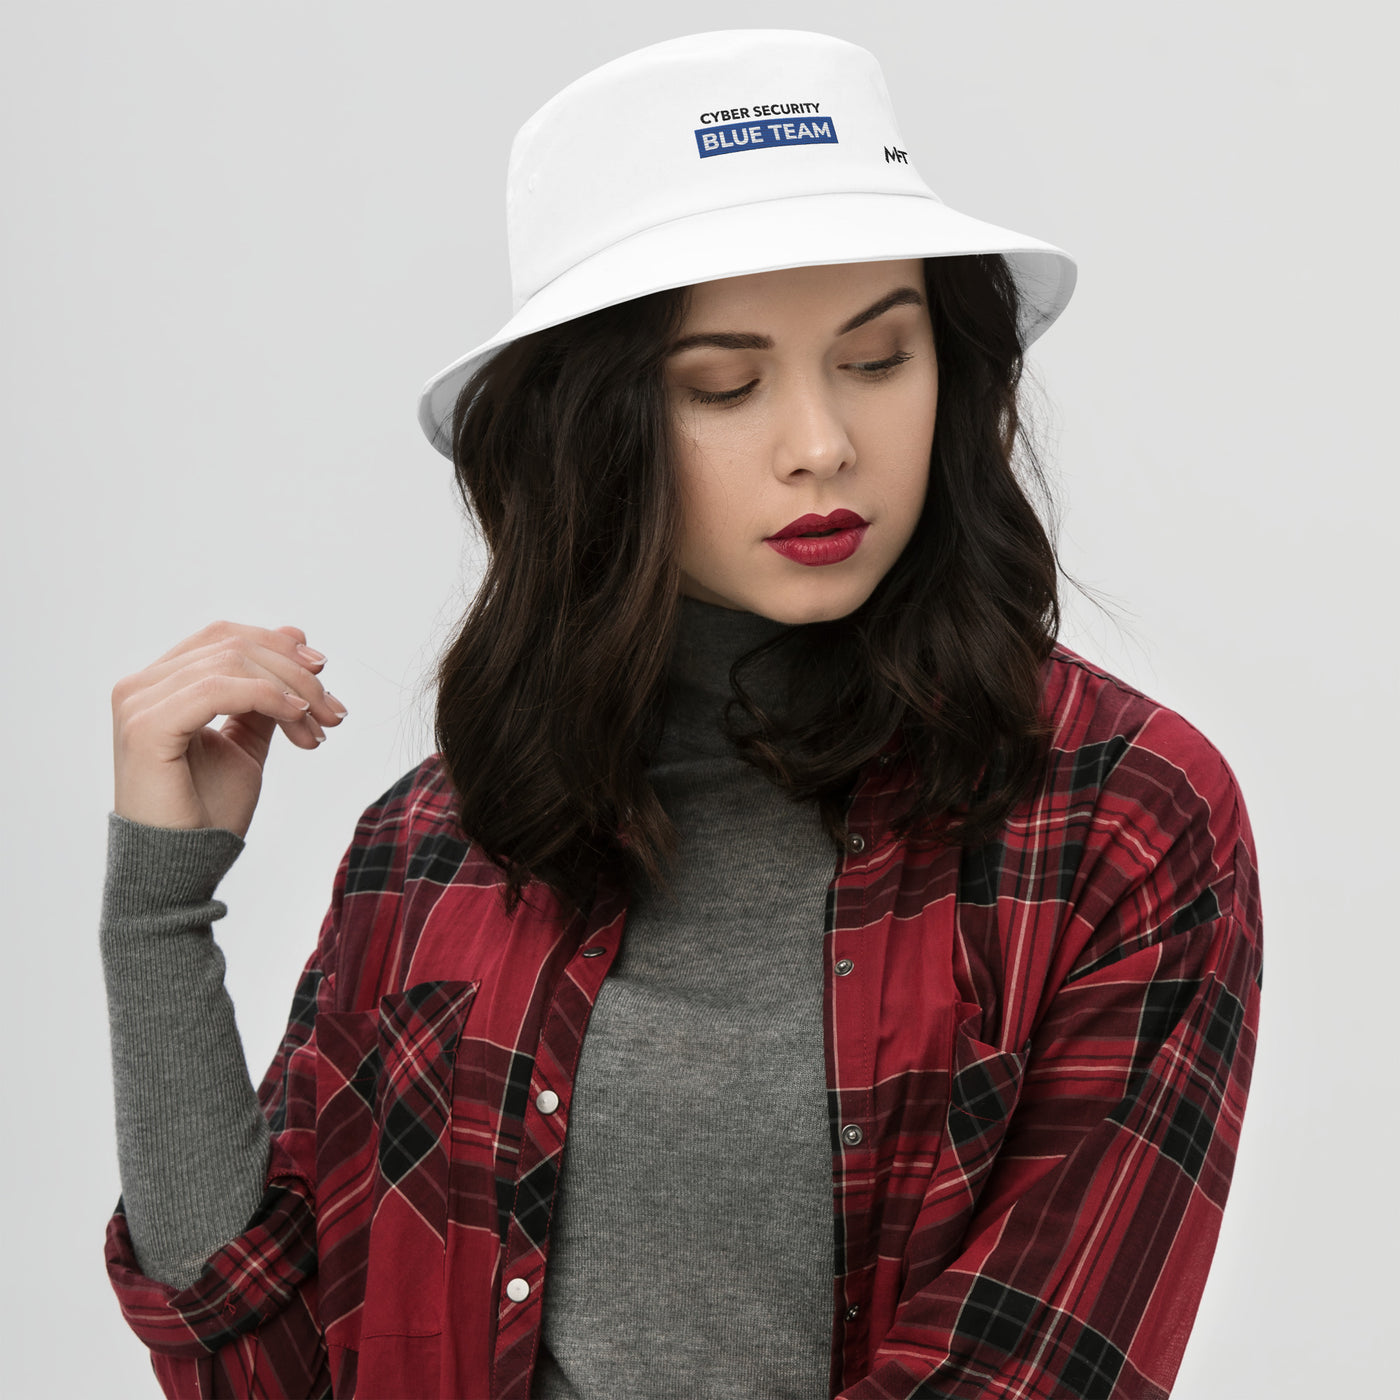 Cyber Security Blue Team V11 - Bucket Hat